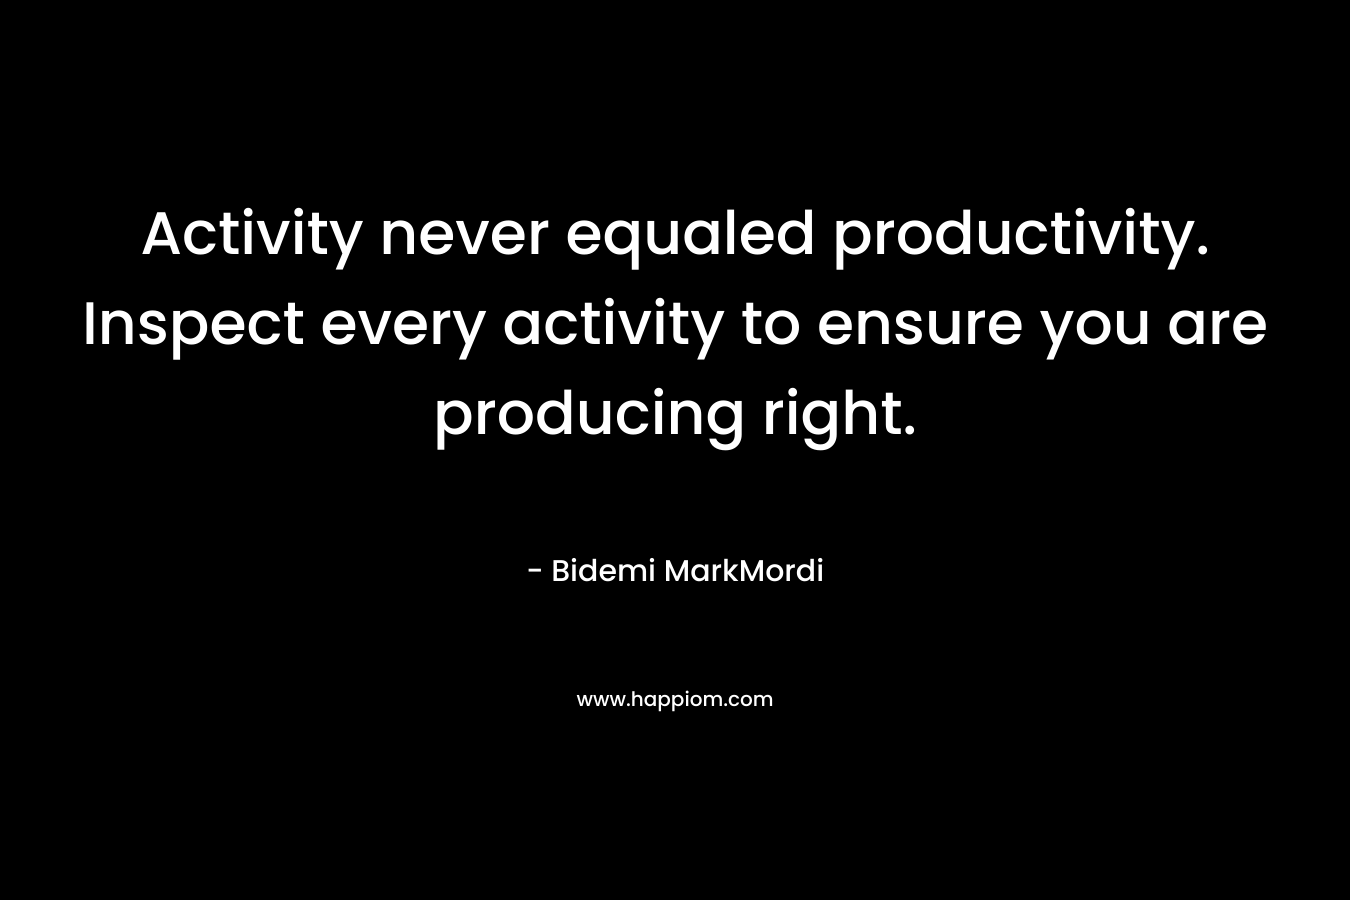 Activity never equaled productivity. Inspect every activity to ensure you are producing right.